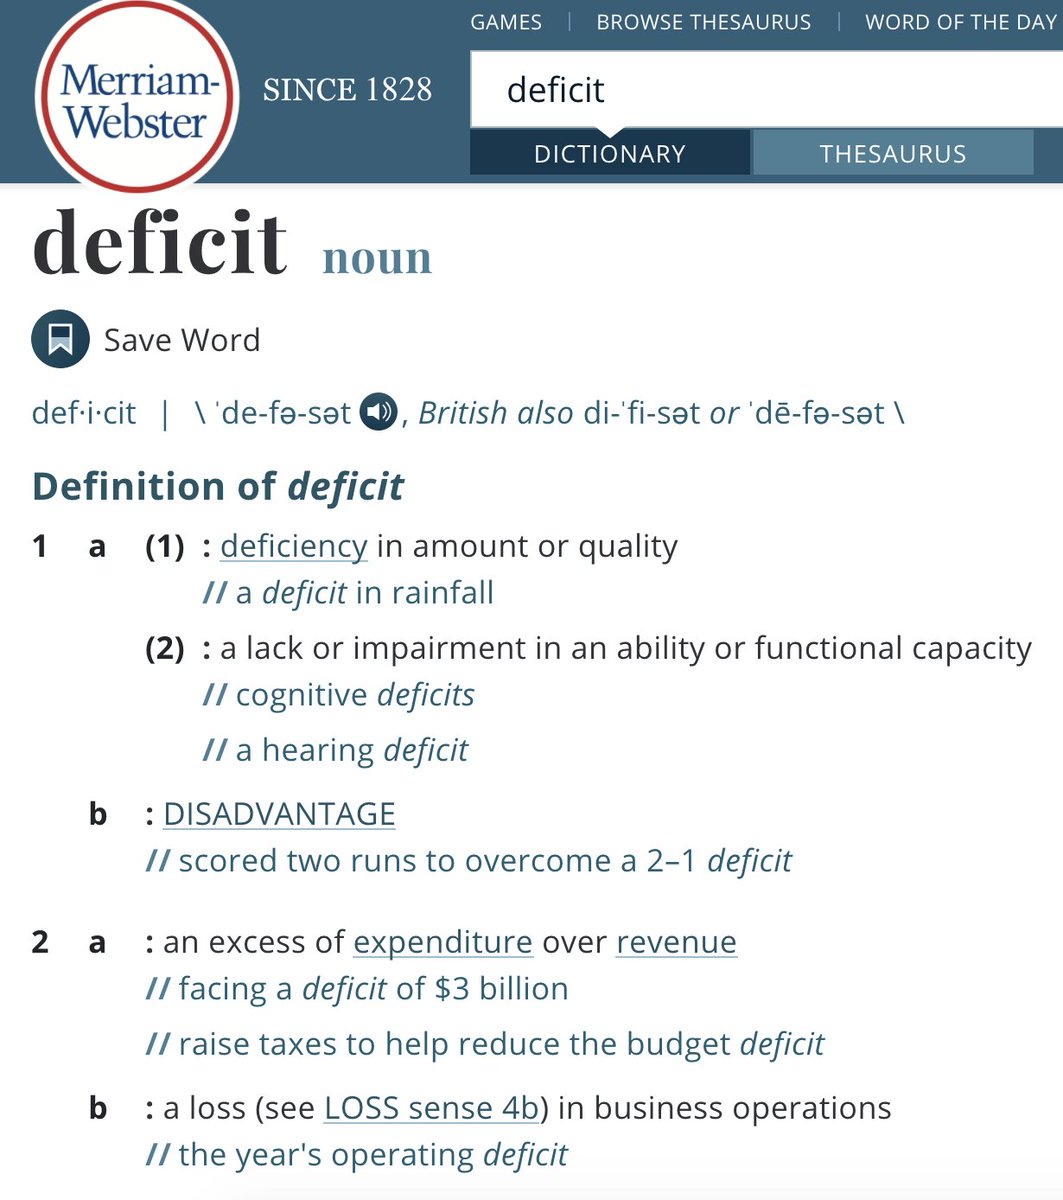 Standard definitions of a "deficit" include: